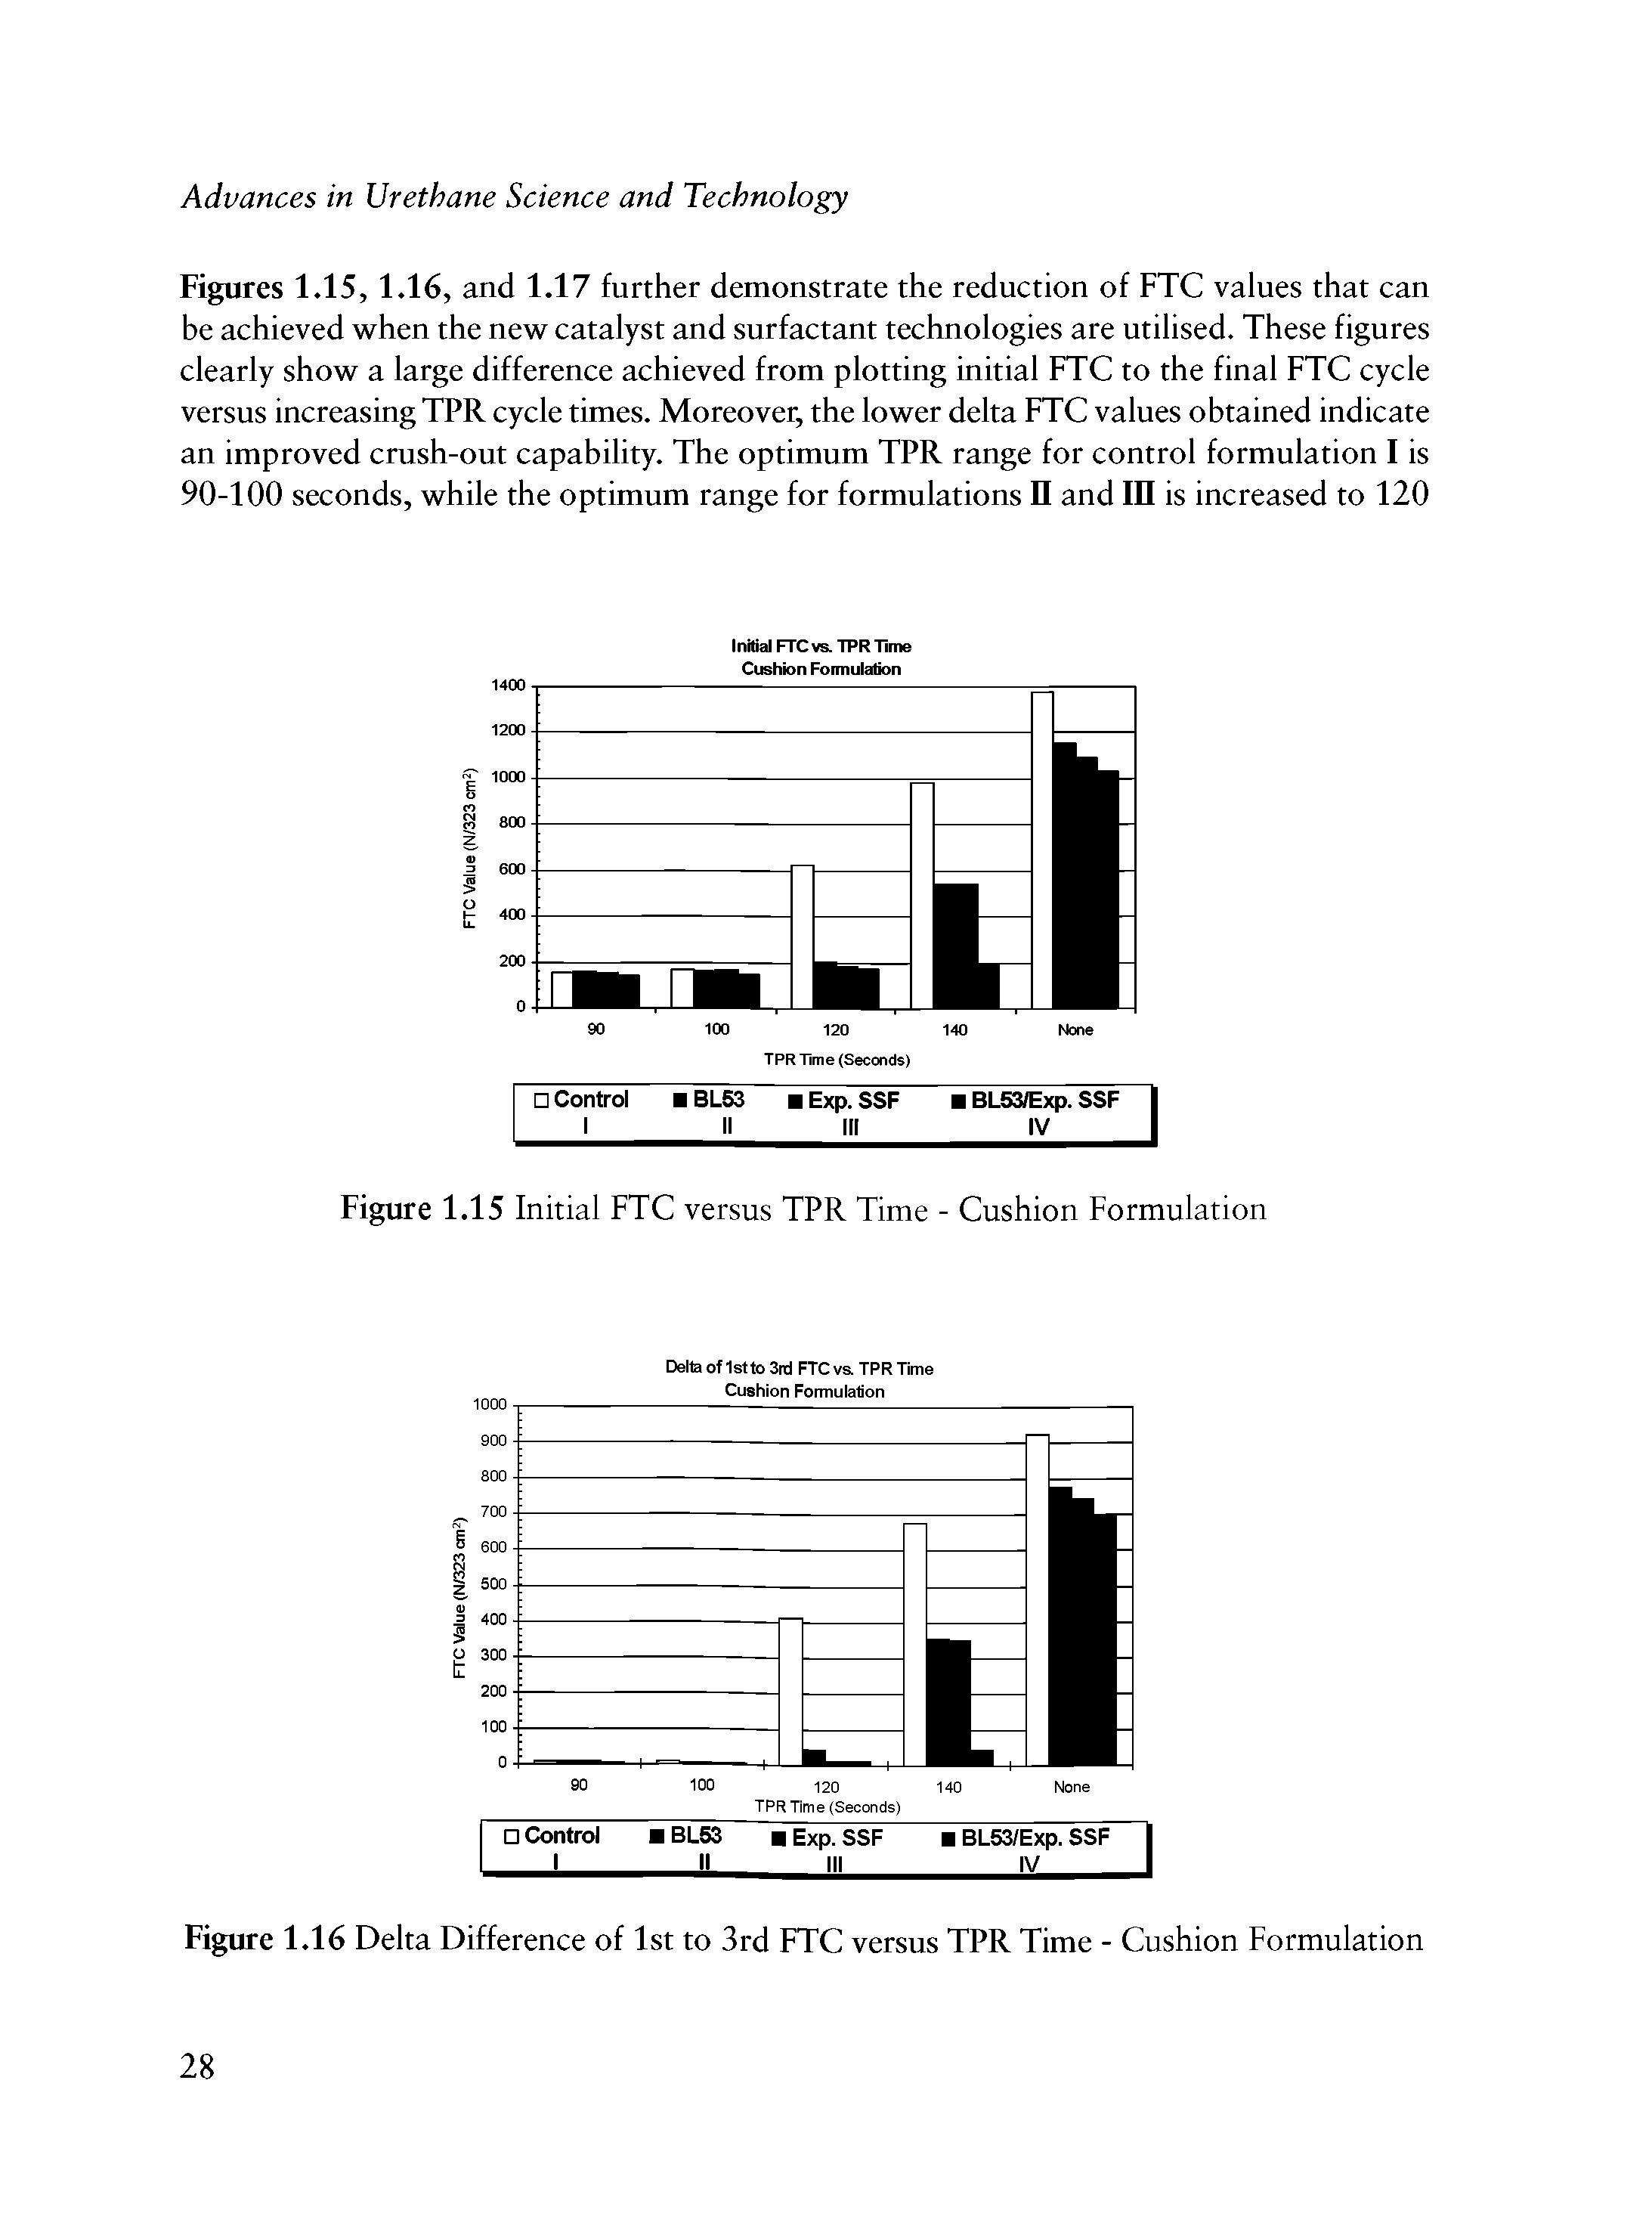 Figures 1.15, 1.16, and 1.17 further demonstrate the reduction of FTC values that can be achieved when the new catalyst and surfactant technologies are utilised. These figures clearly show a large difference achieved from plotting initial FTC to the final FTC cycle versus increasing TPR cycle times. Moreover, the lower delta FTC values obtained indicate an improved crush-out capability. The optimum TPR range for control formulation I is 90-100 seconds, while the optimum range for formulations II and III is increased to 120...